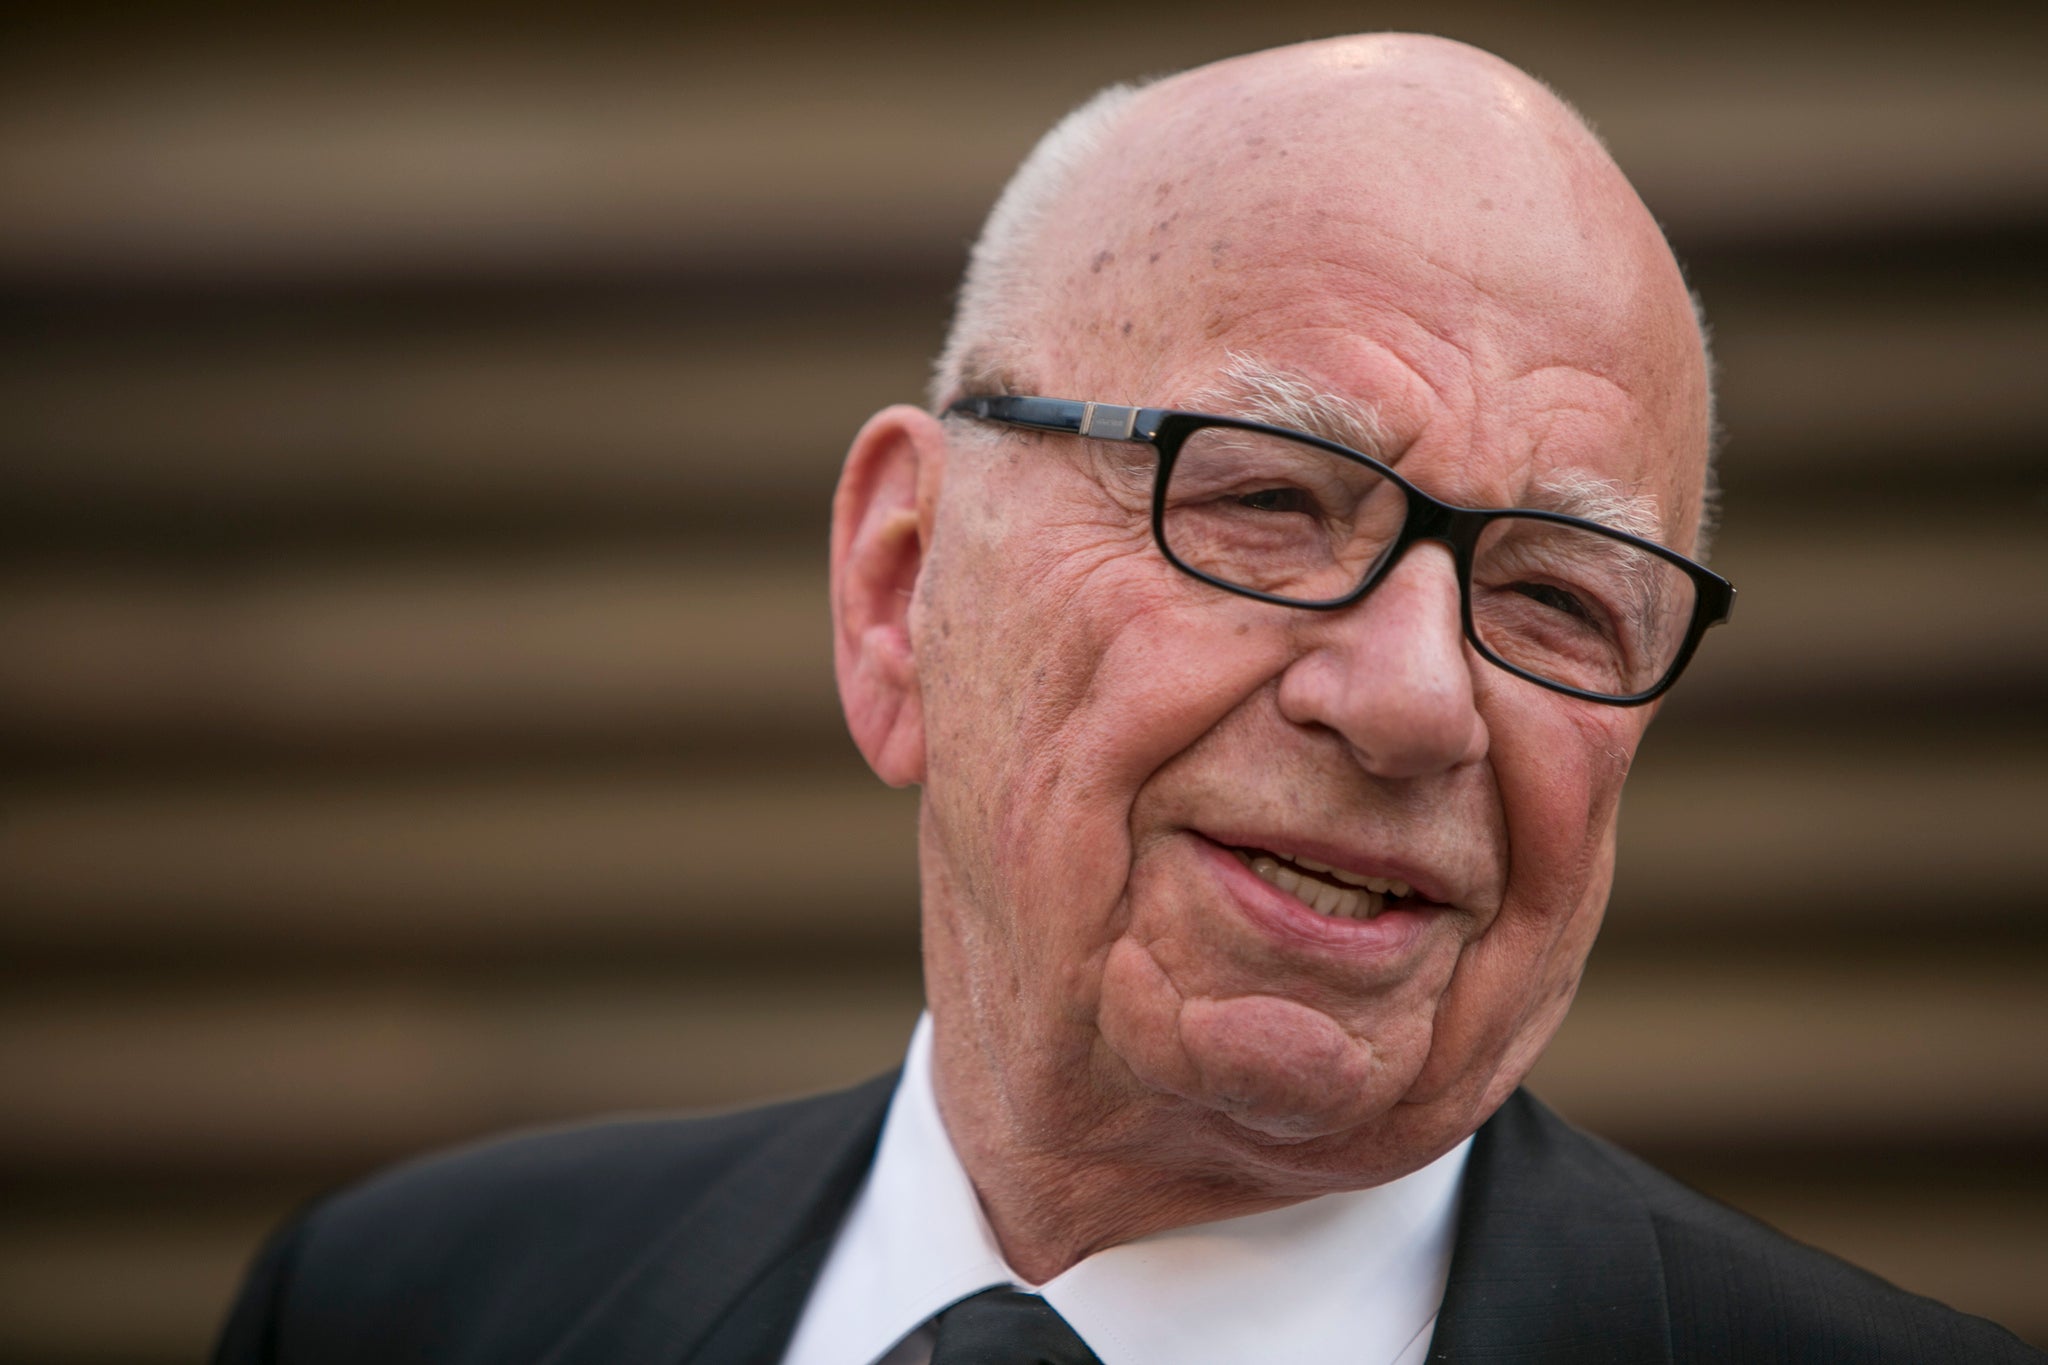 Rupert Murdoch has said climate change should be treated with scepticism